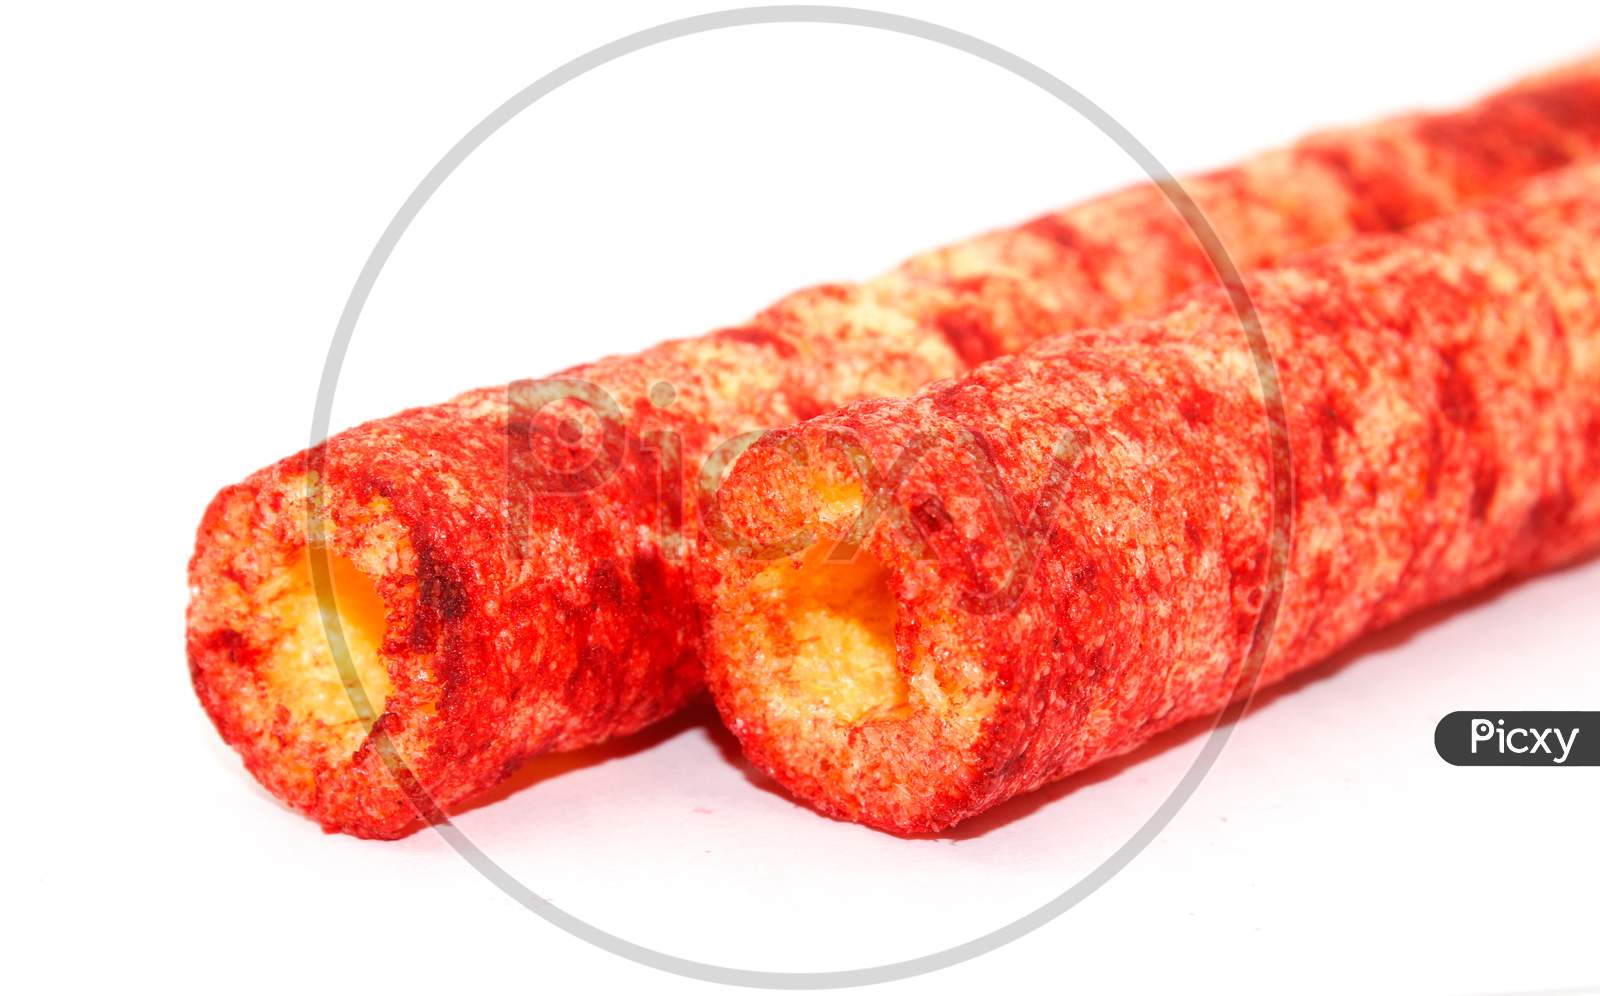 Crispy And Spicy Roll On White Background With Selective Focus